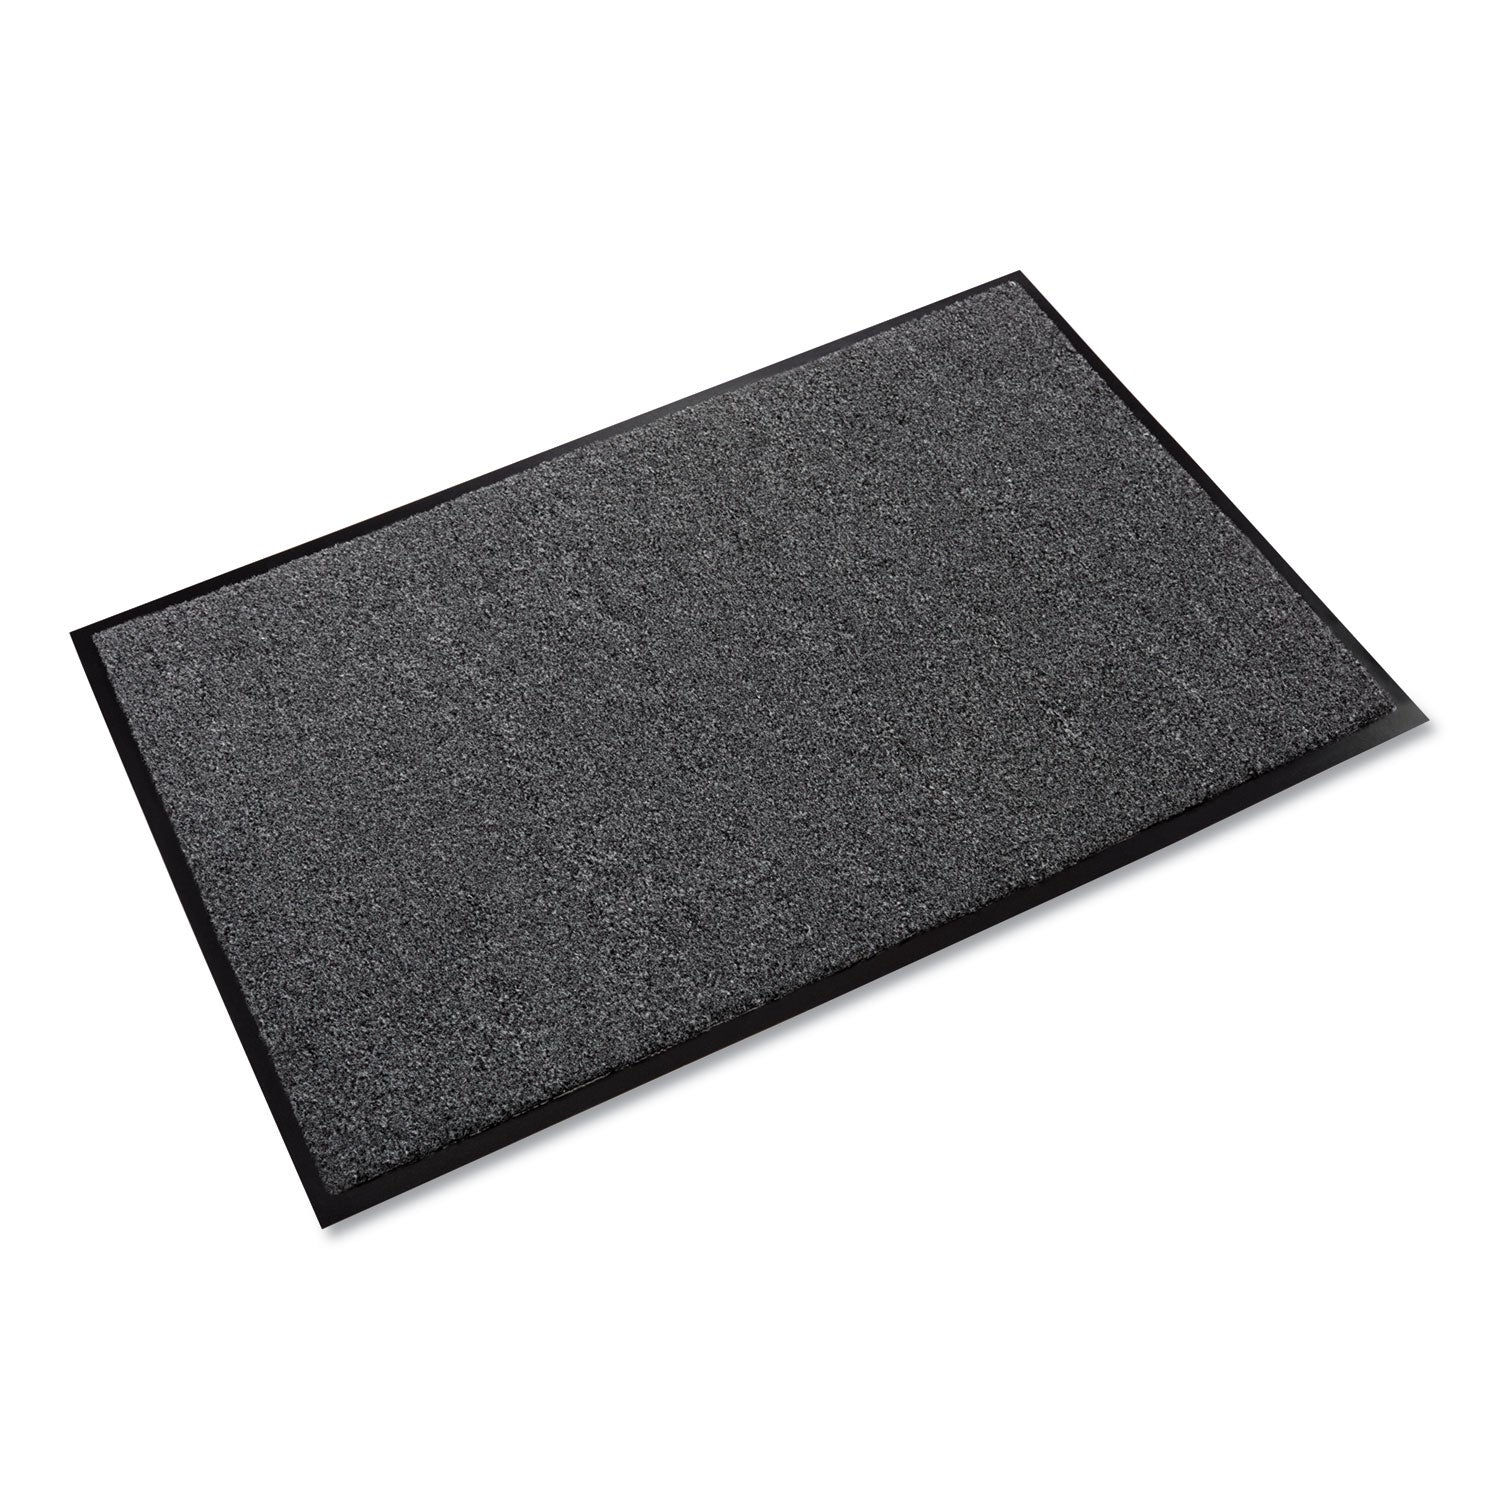 Rely-On Olefin Indoor Wiper Mat, 48 x 72, Charcoal - 1